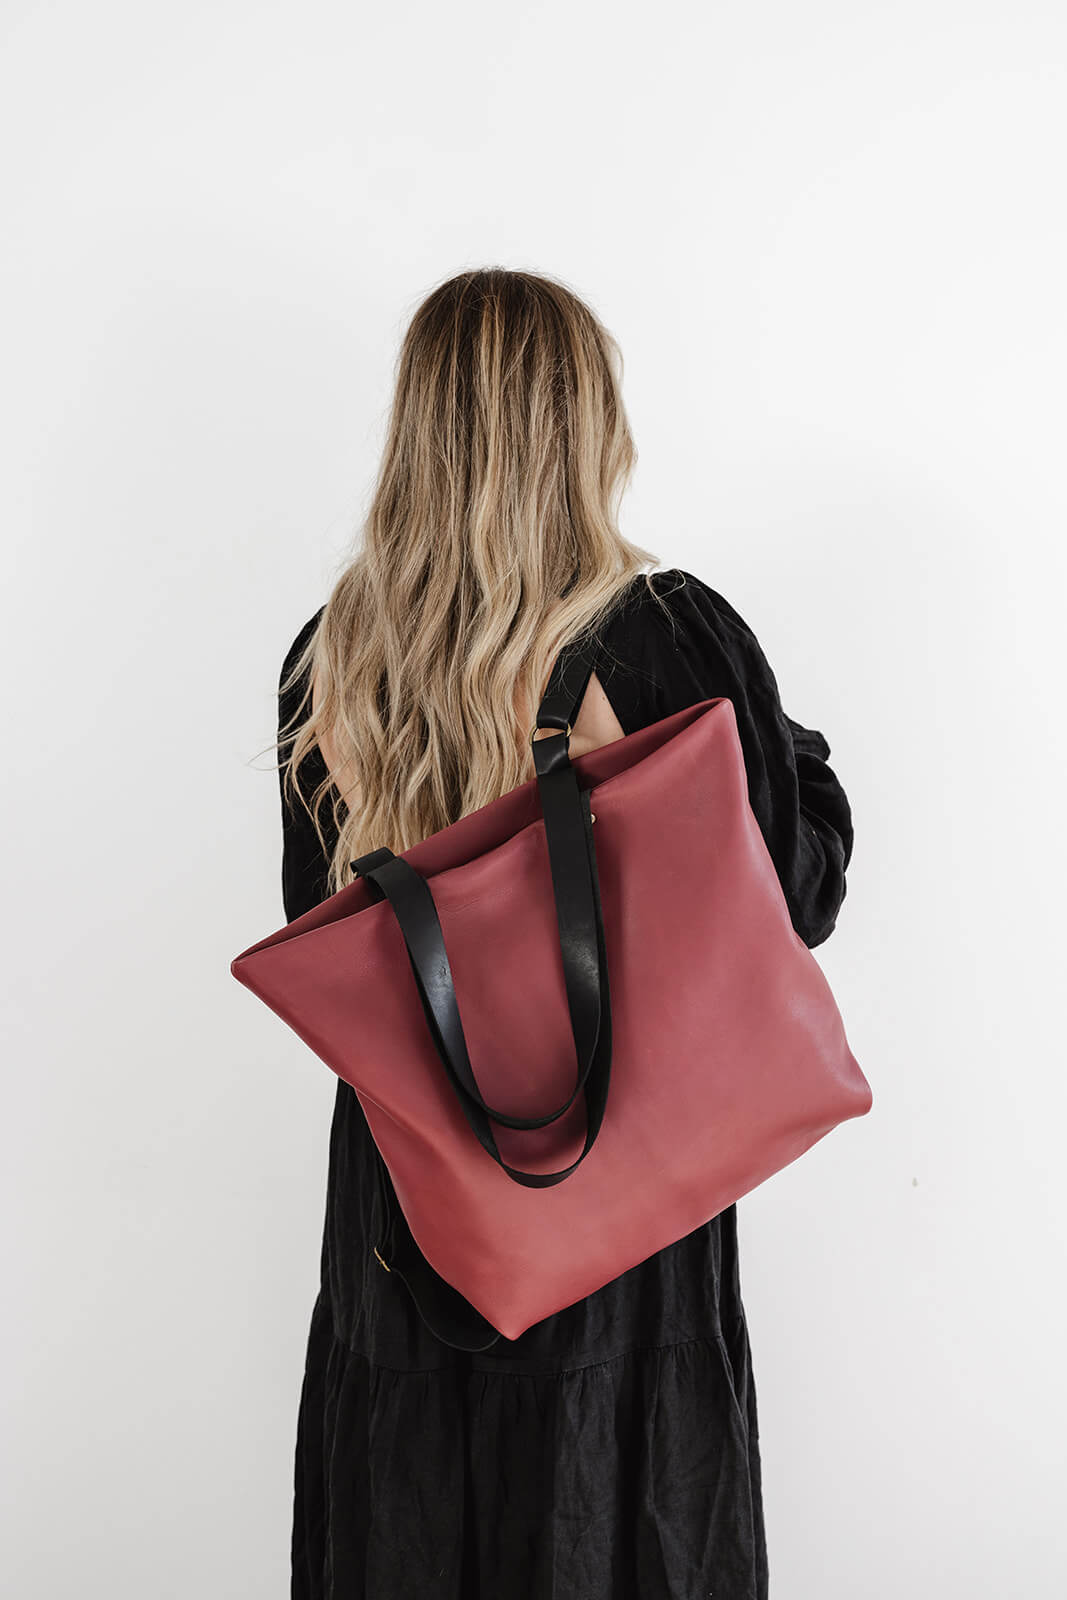 Product pic of the Ella Jackson Cherry Leather Backpack & Tote being worn as a backpack on one shoulder. The woman has long flowing blonde hair, is wearing a long black dress and is standing in front of a white background